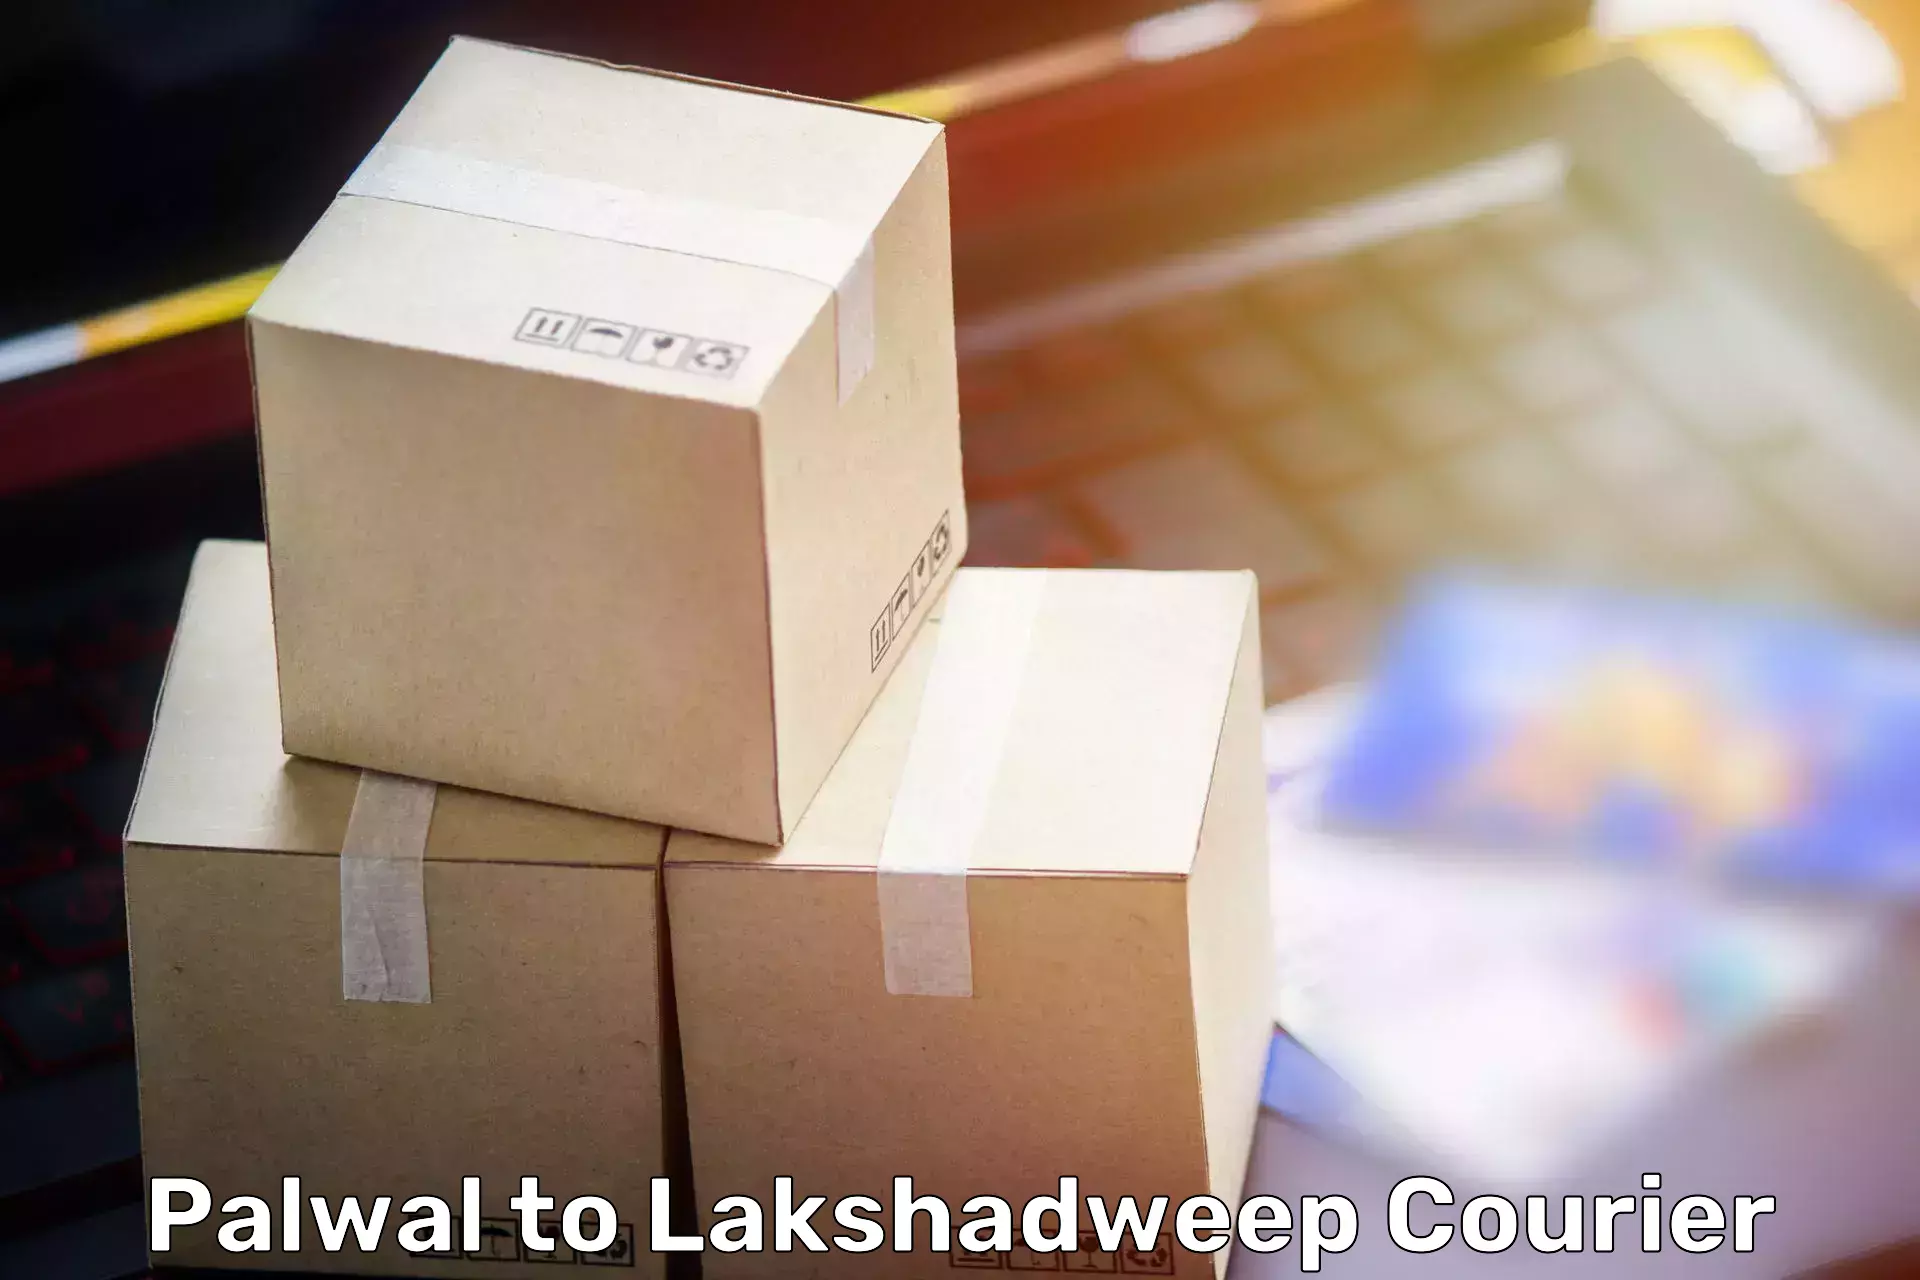 Home relocation experts Palwal to Lakshadweep